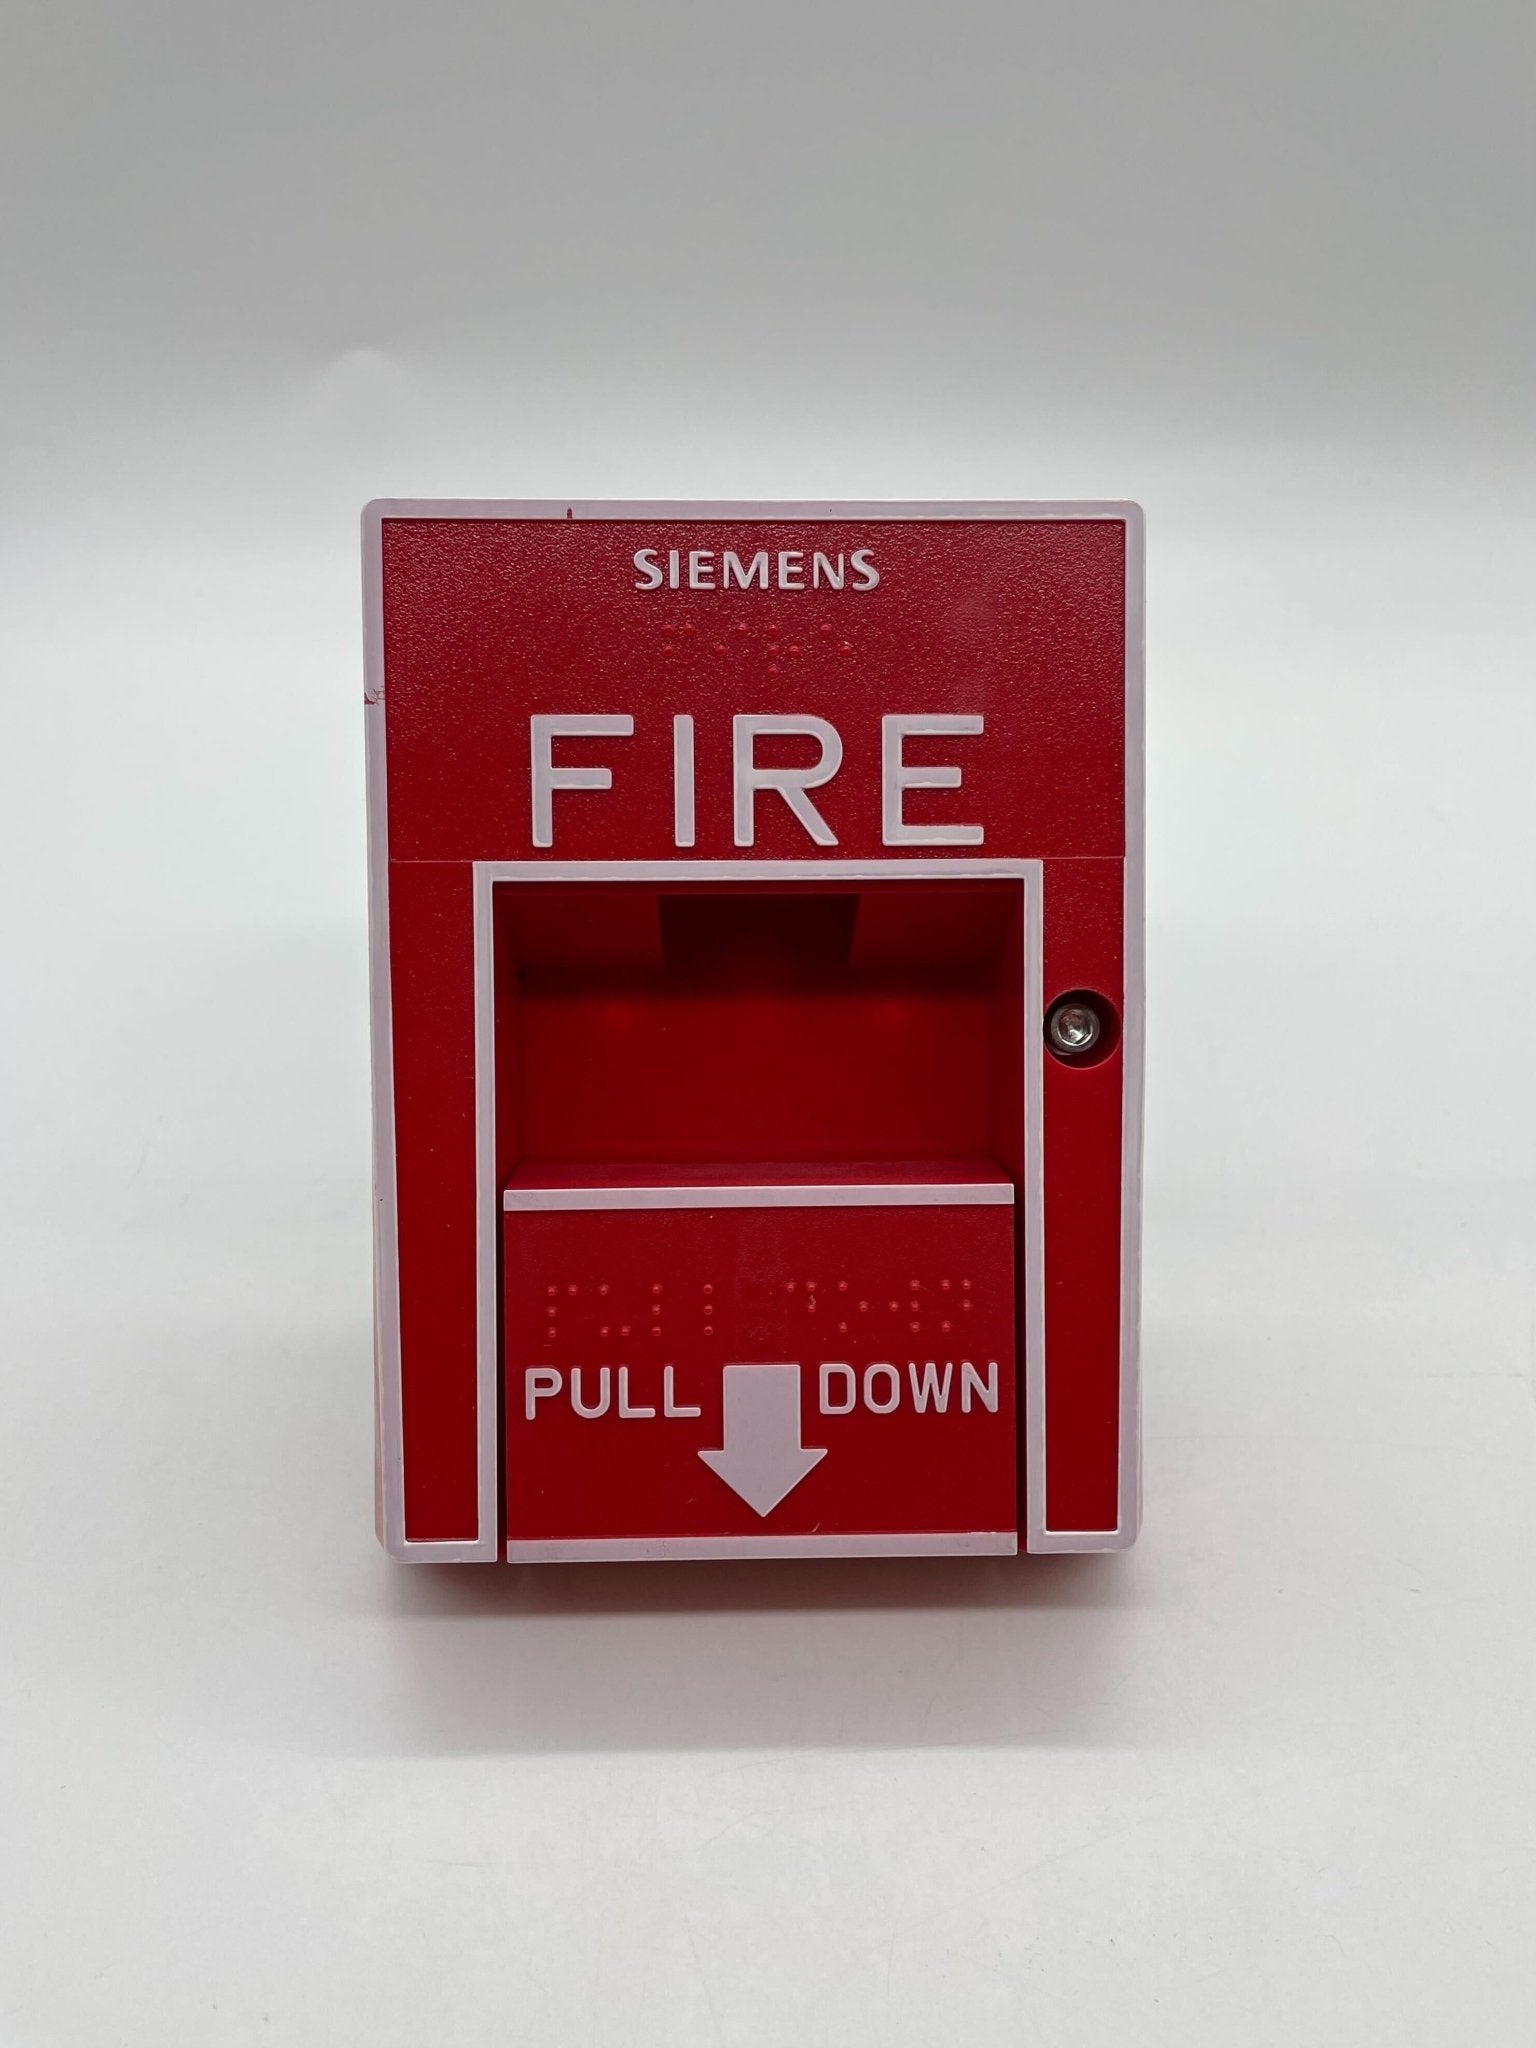 Siemens MS-51 Manual Pull Station Fire Alarm - The Fire Alarm Supplier